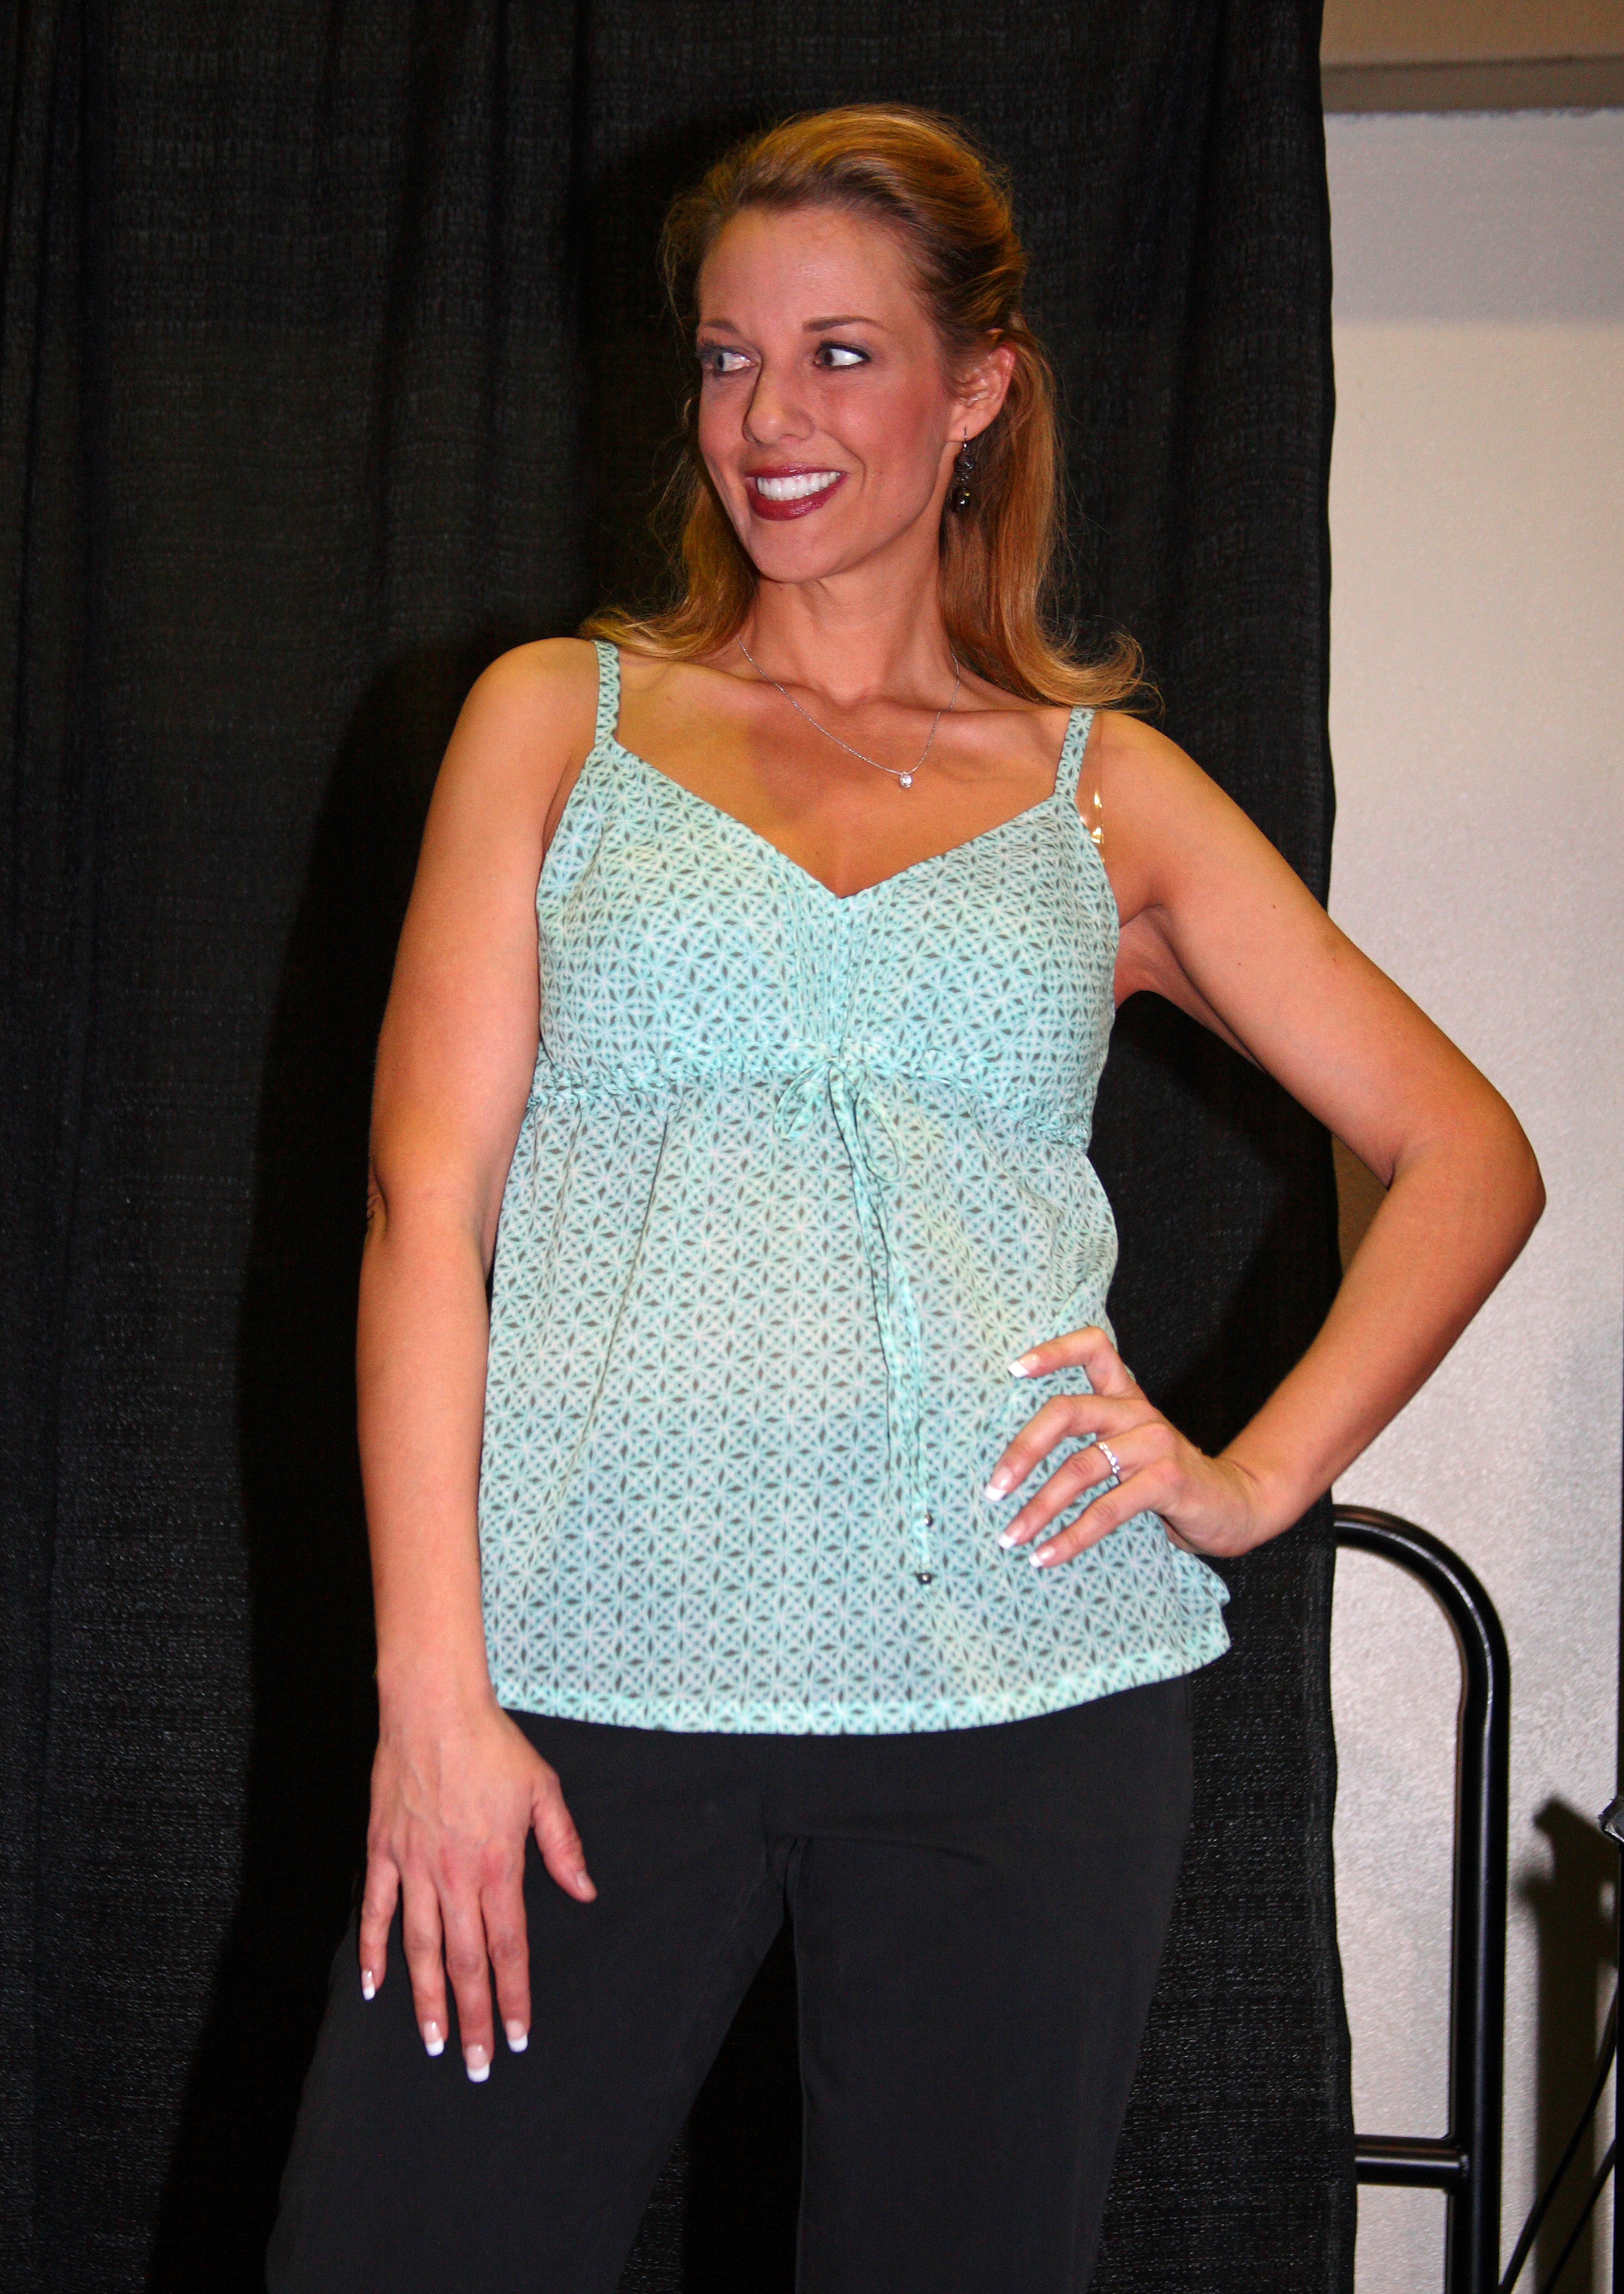 Model at the Spring Fling Fashion Show (IMG 4759a) (5647678580)